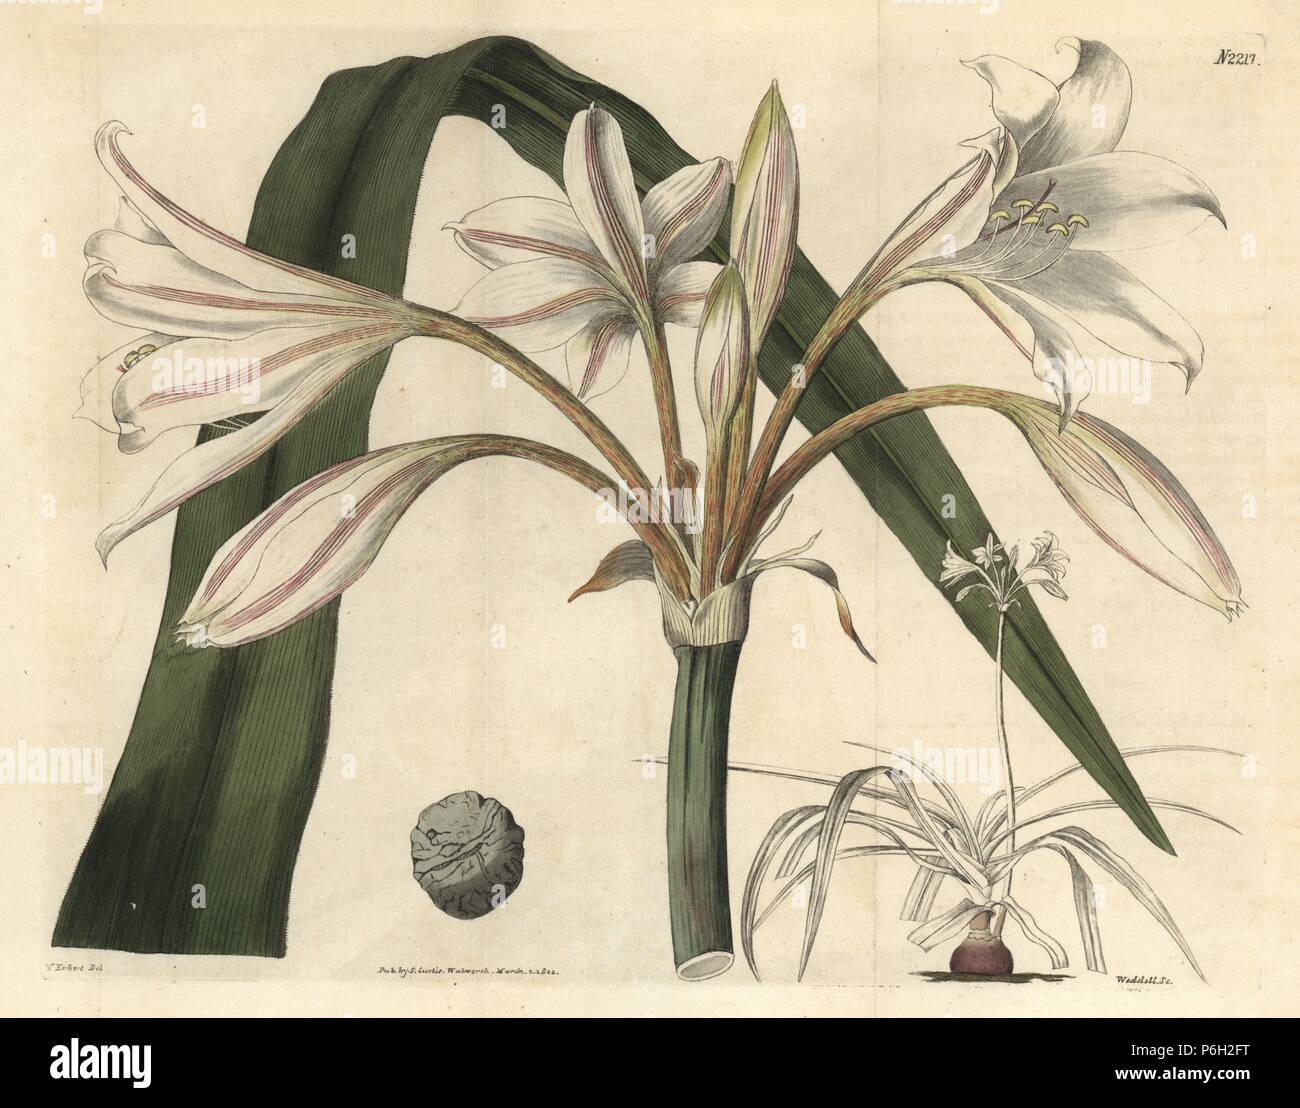 Scarborough lily, Cyrtanthus elatus (Specious-flowered crinum, Crinum speciosum). Handcoloured copperplate engraving by Weddell after a drawing by William Herbert for Samuel Curtis' continuation of William Curtis' Botanical Magazine, London, 1822. Stock Photo